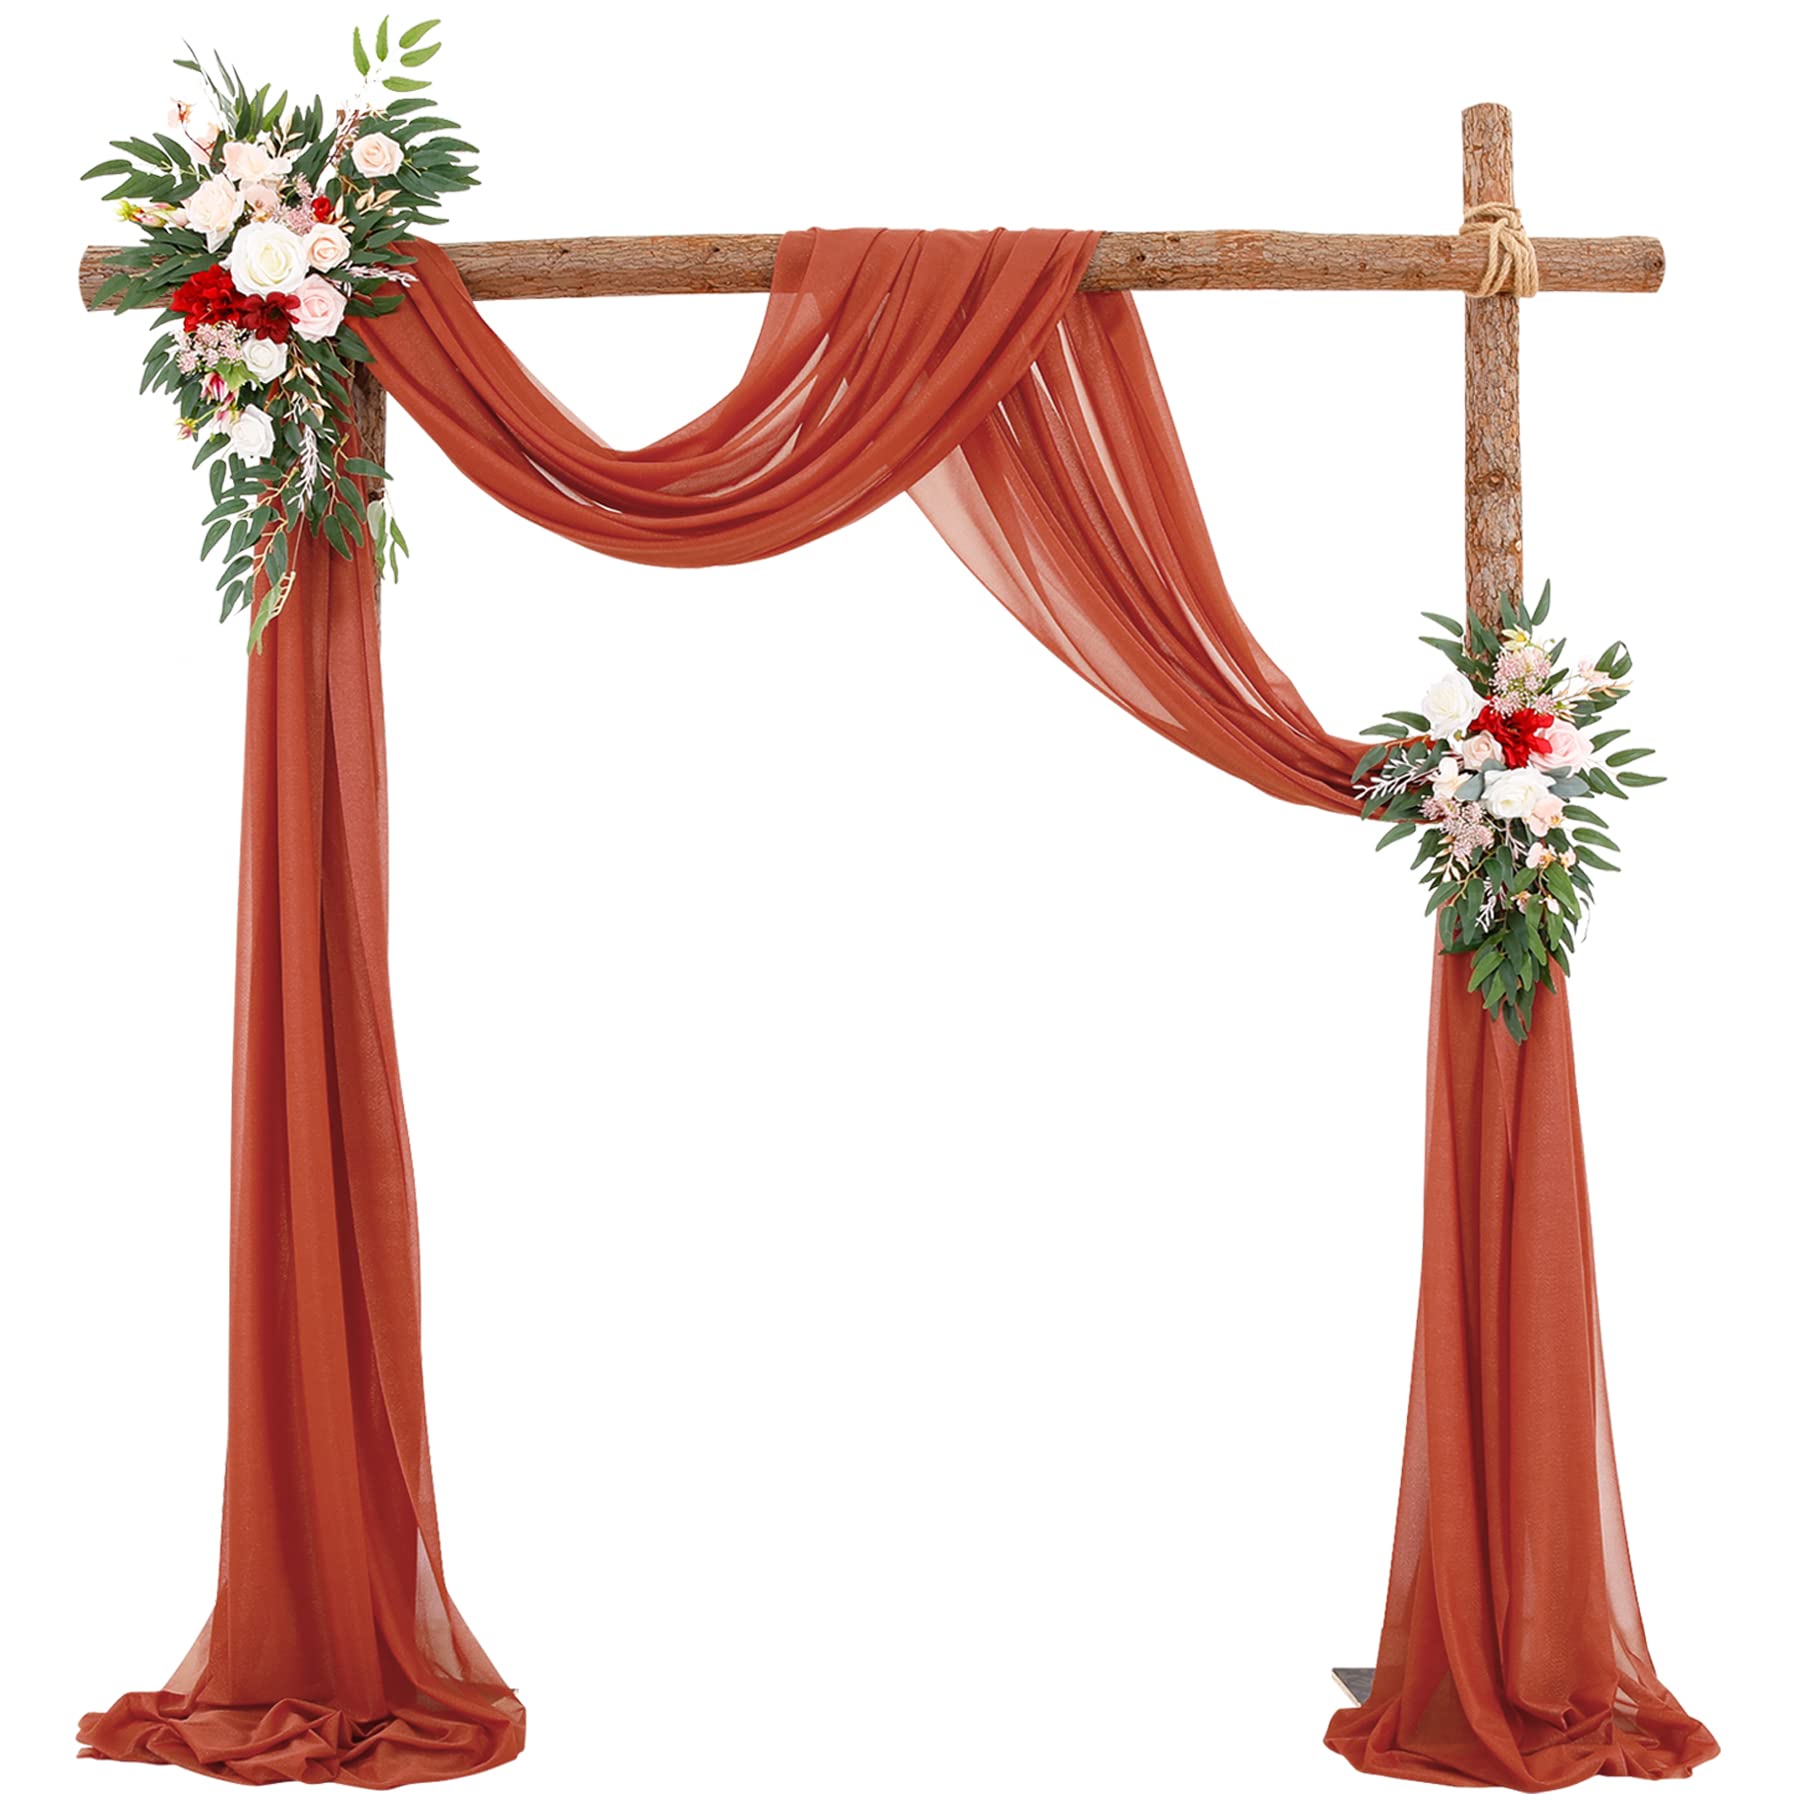 Wedding Arch Draping Fabric,2 Panels Terracotta Tulle Ceiling ...